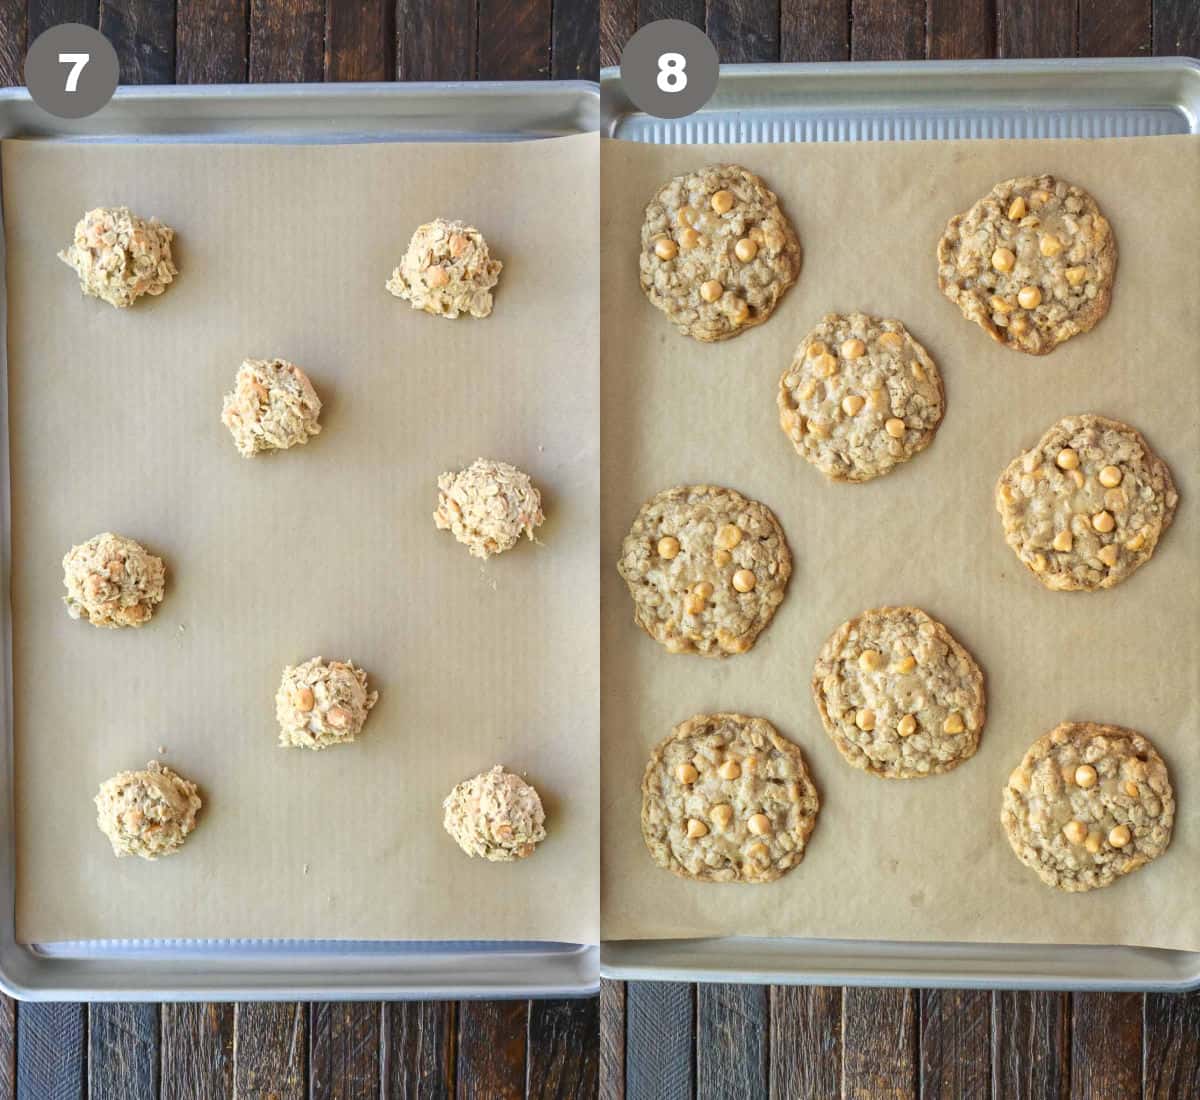 Cookie dough balls placed on a parchment paper lined baking sheet to bake.